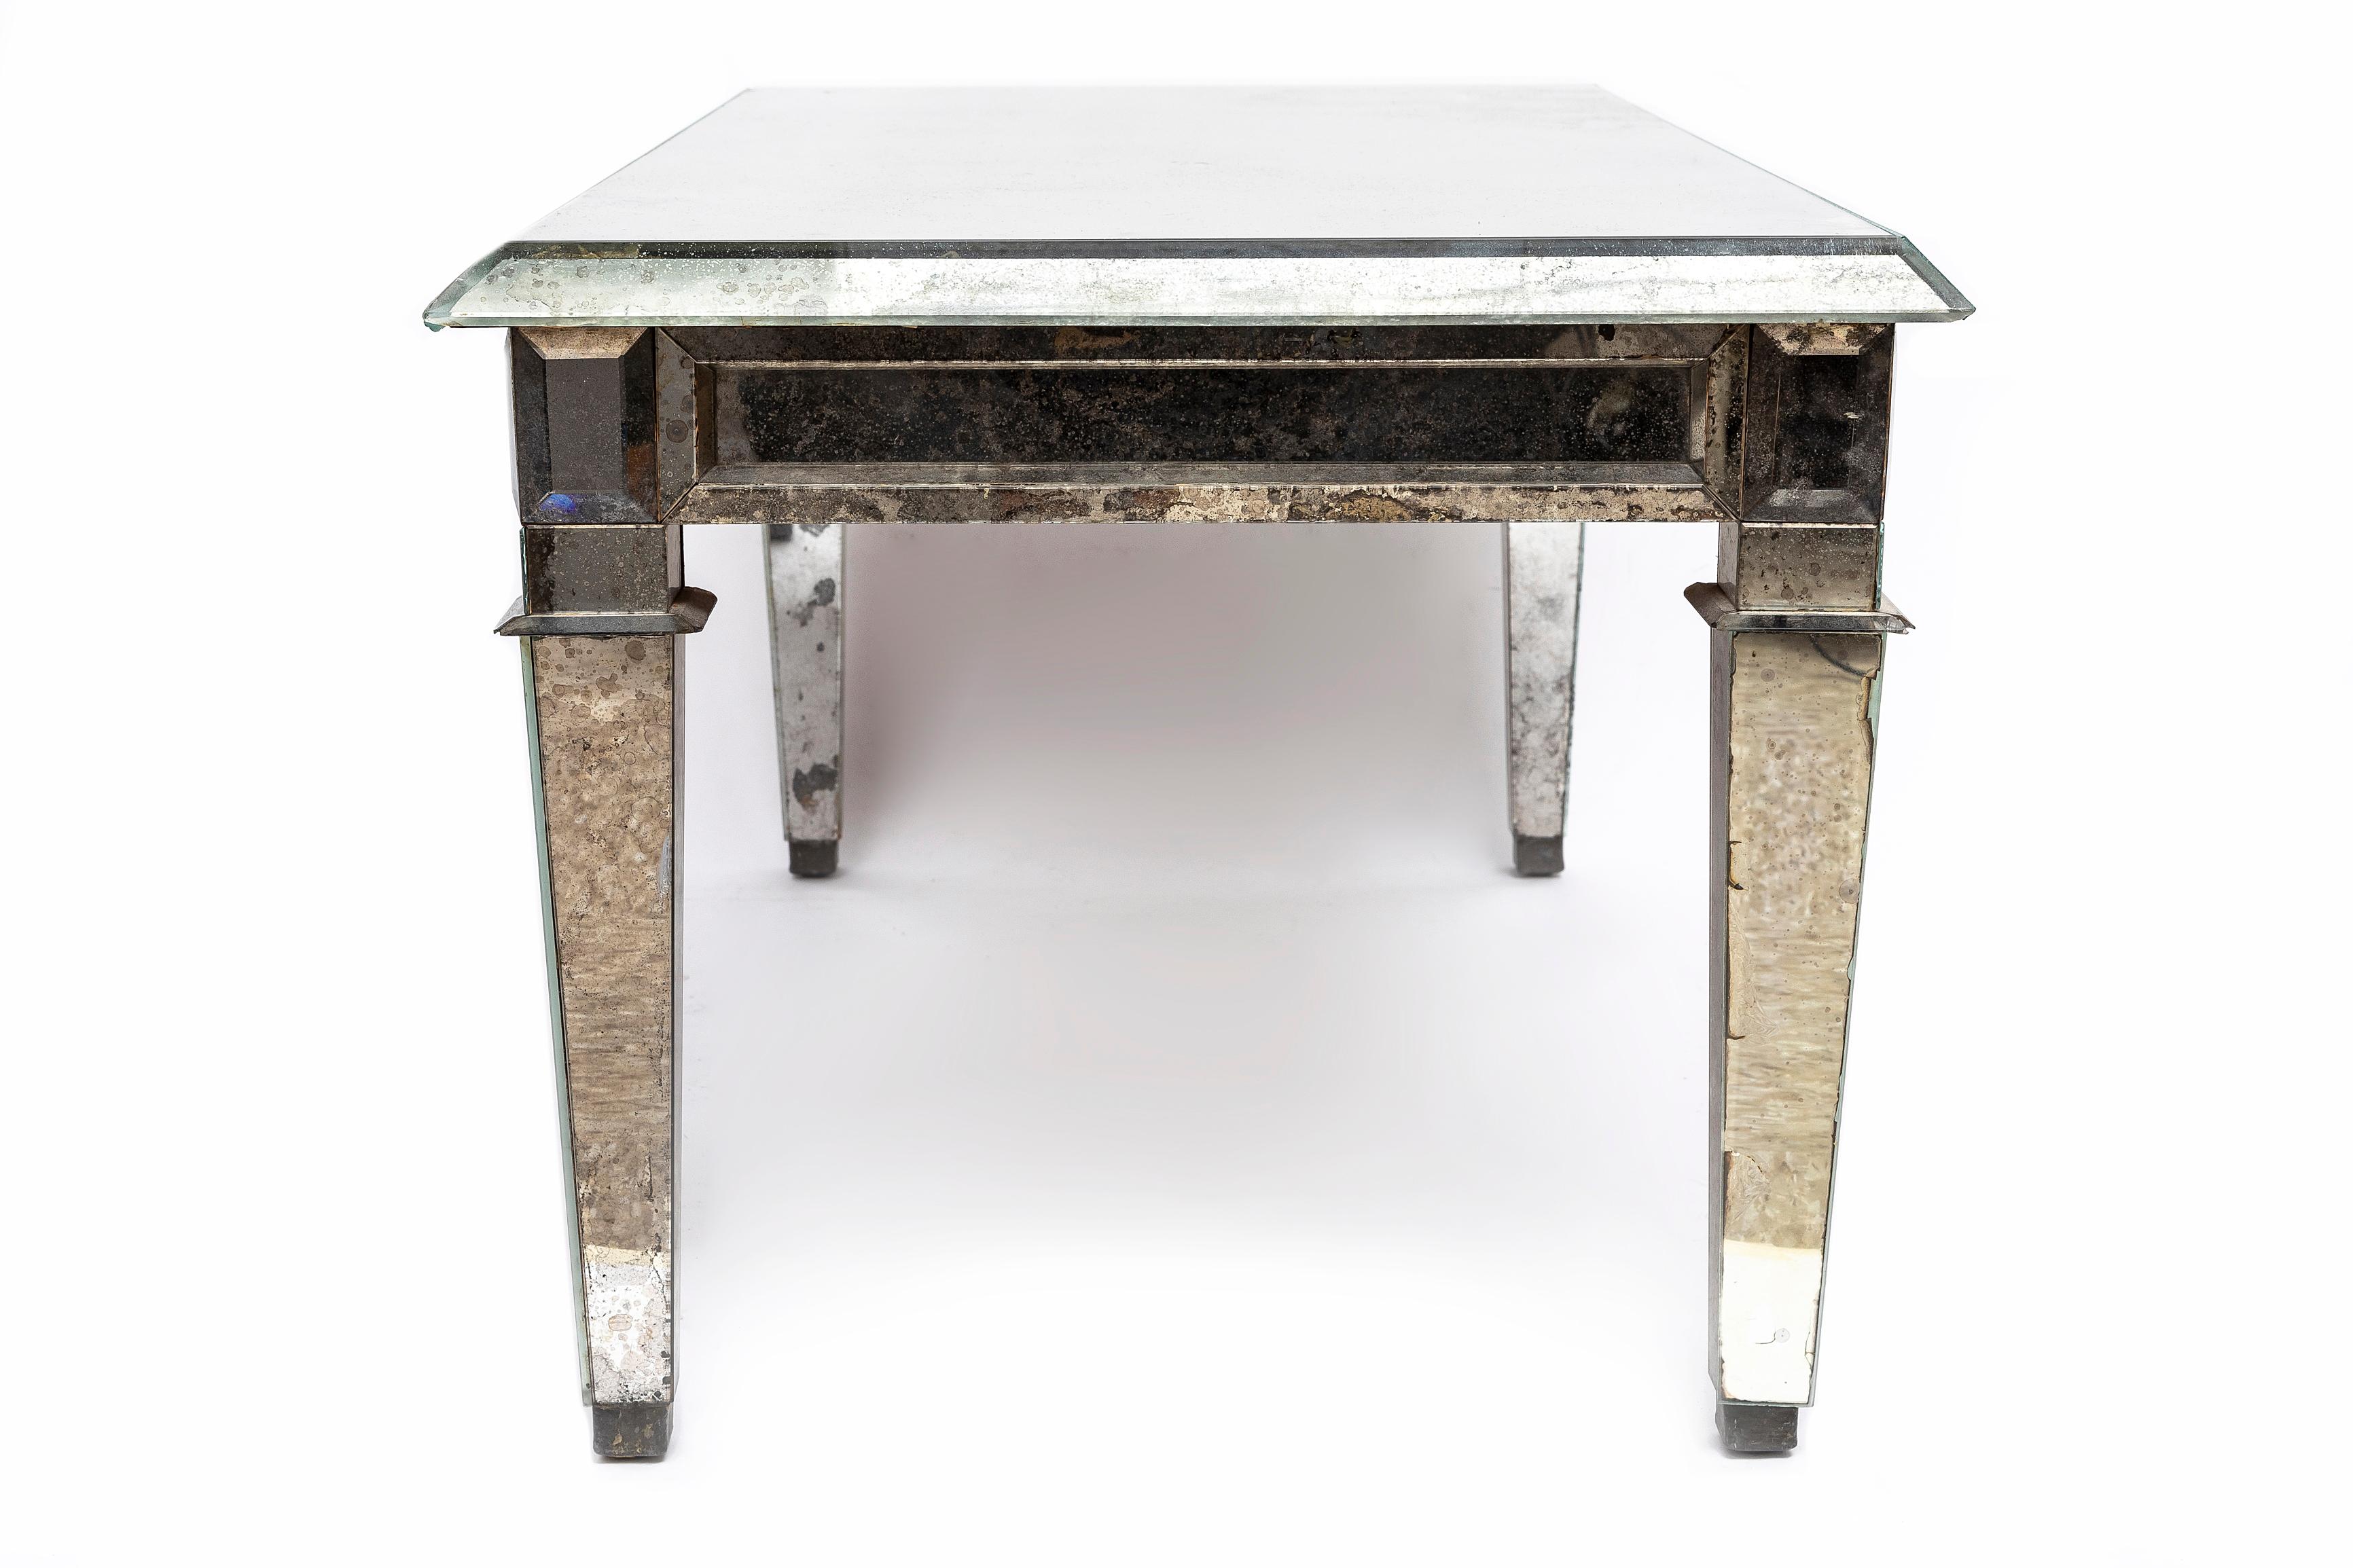 20th Century A Fabulous French Mid Century Mirrored Coffee Table, Attb. Maison Jansen